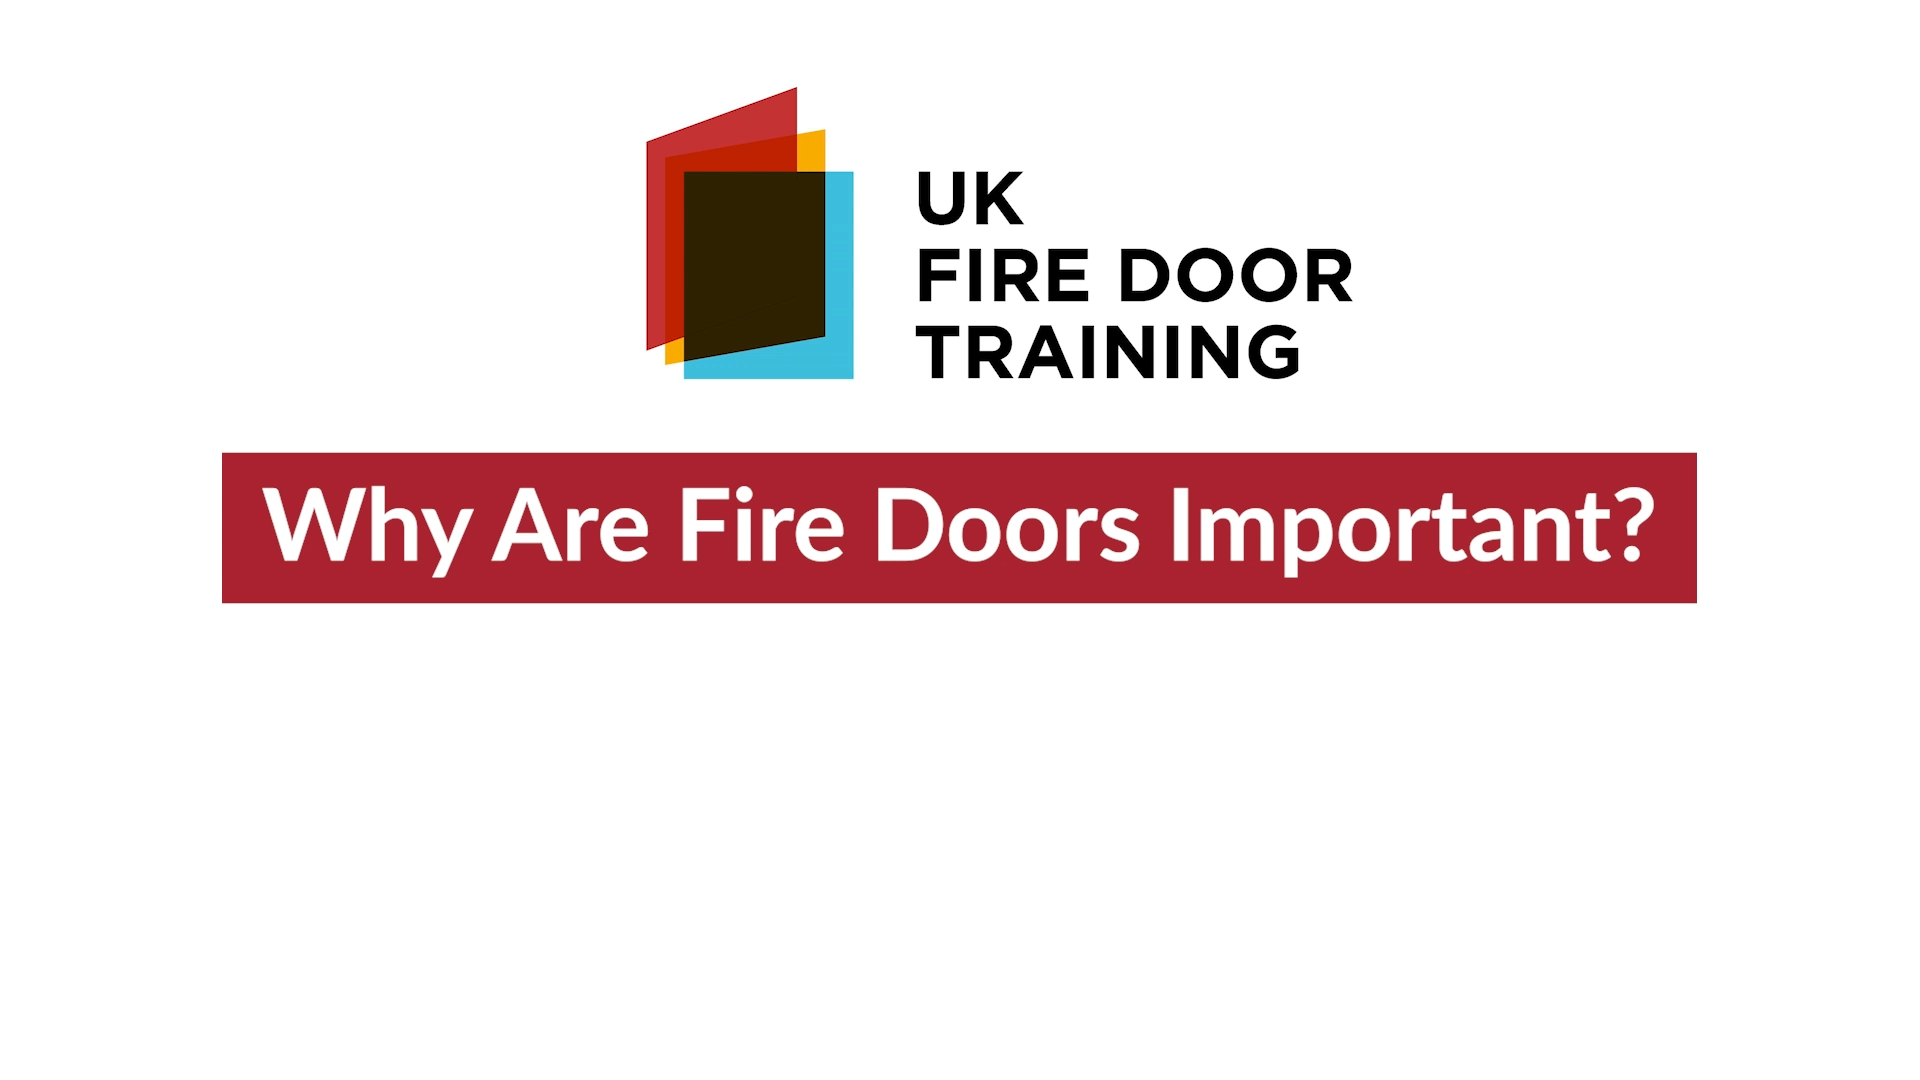 Why are Fire Doors Important?